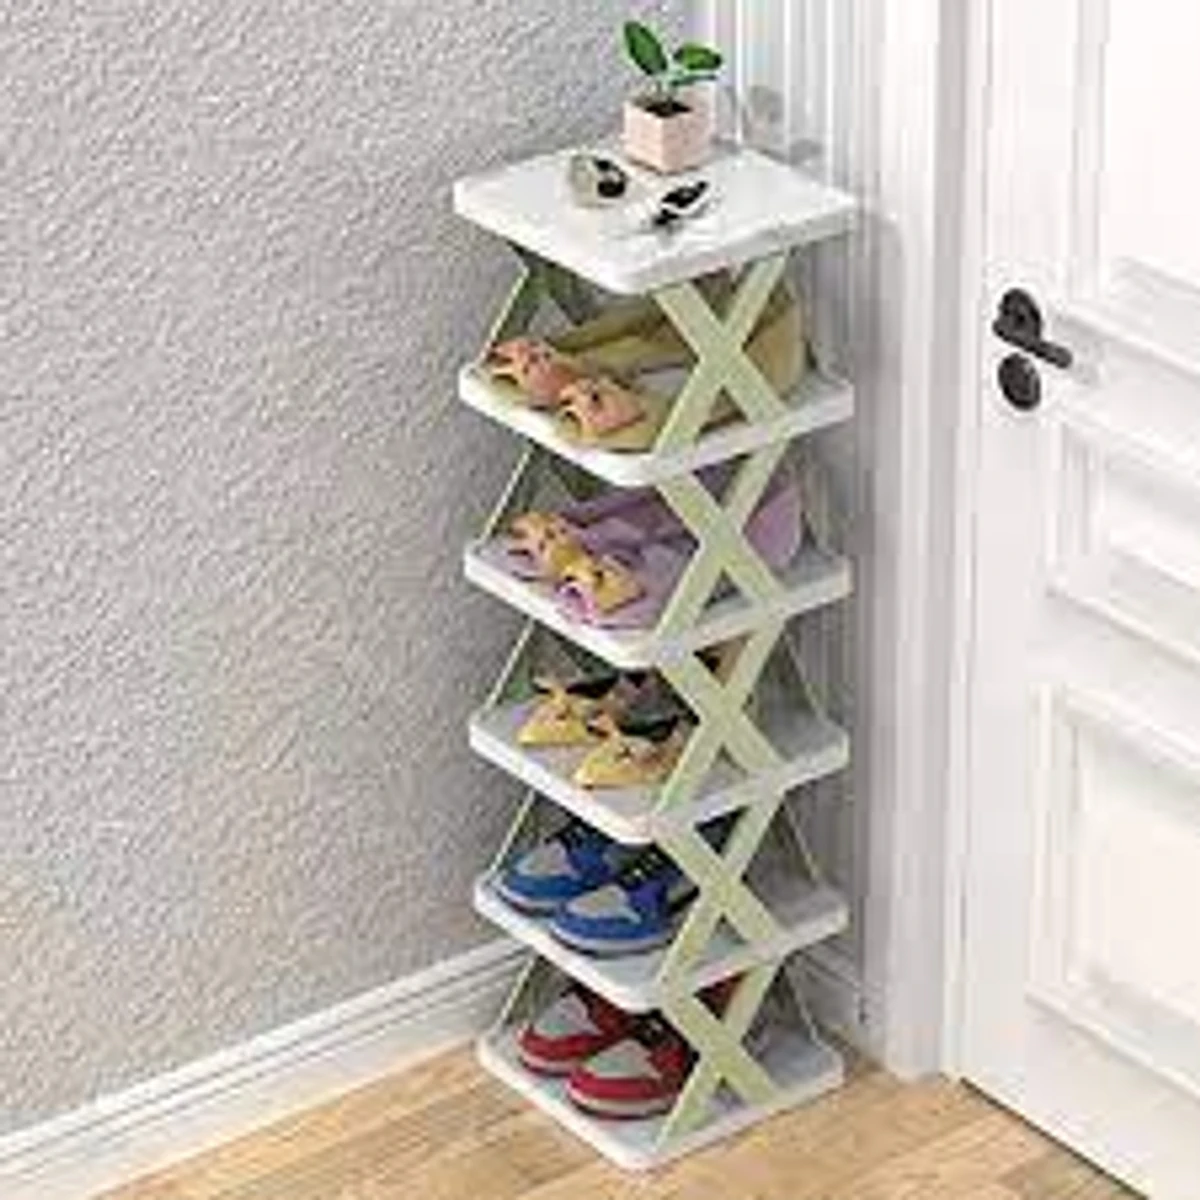 6 Line Multi-Layer Book and Shoe Rack